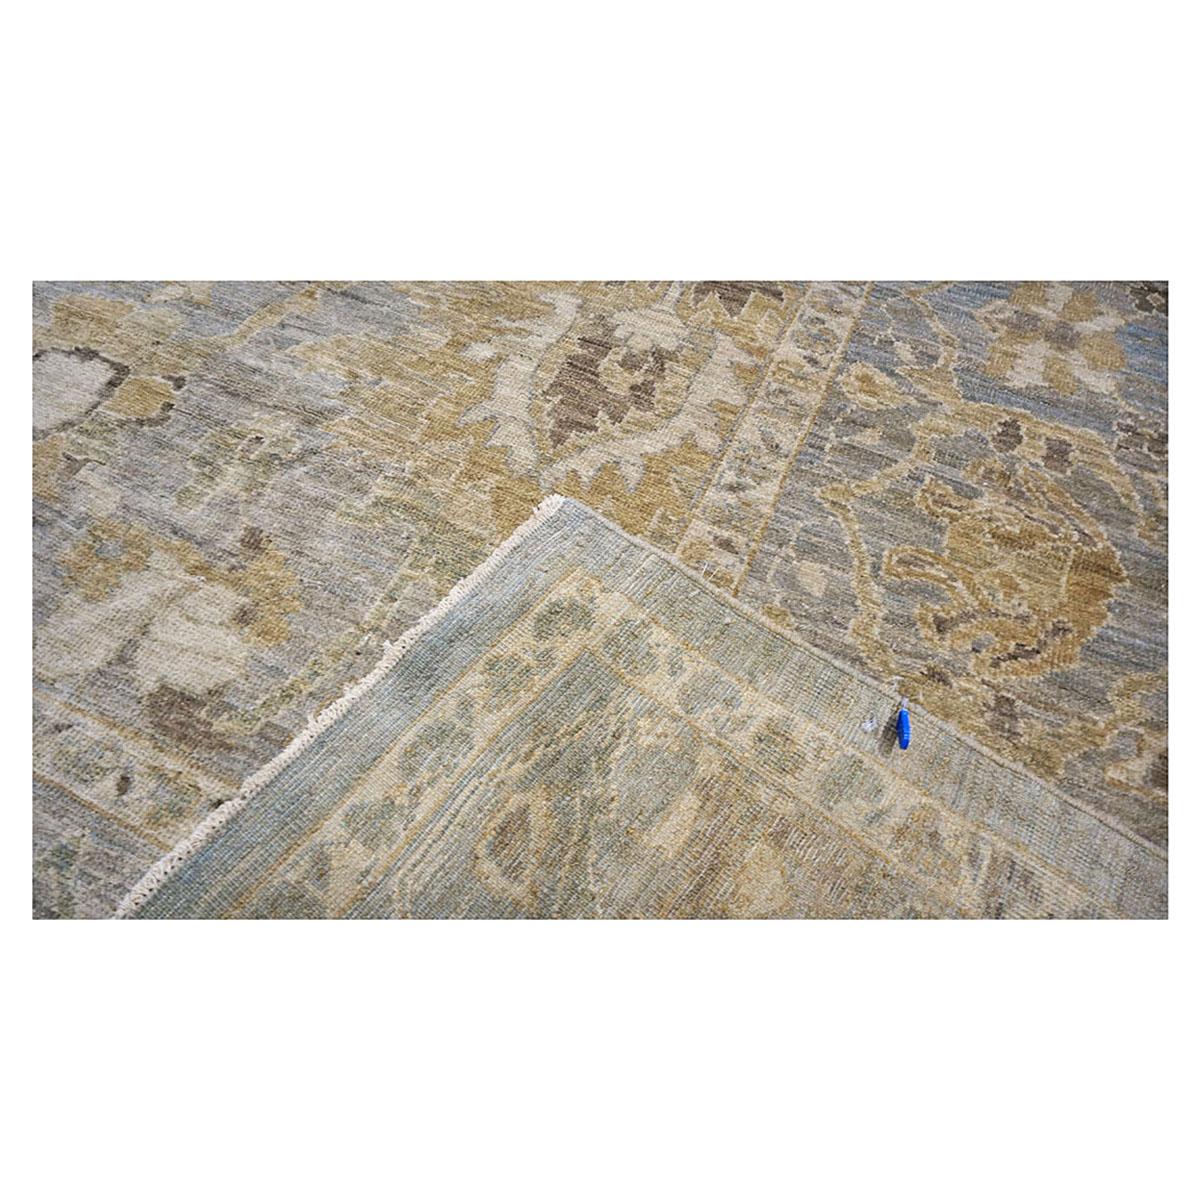 Oversized Persian Sultanabad Master 12x18 Blue, Grey, & Tan Handmade Area Rug For Sale 13